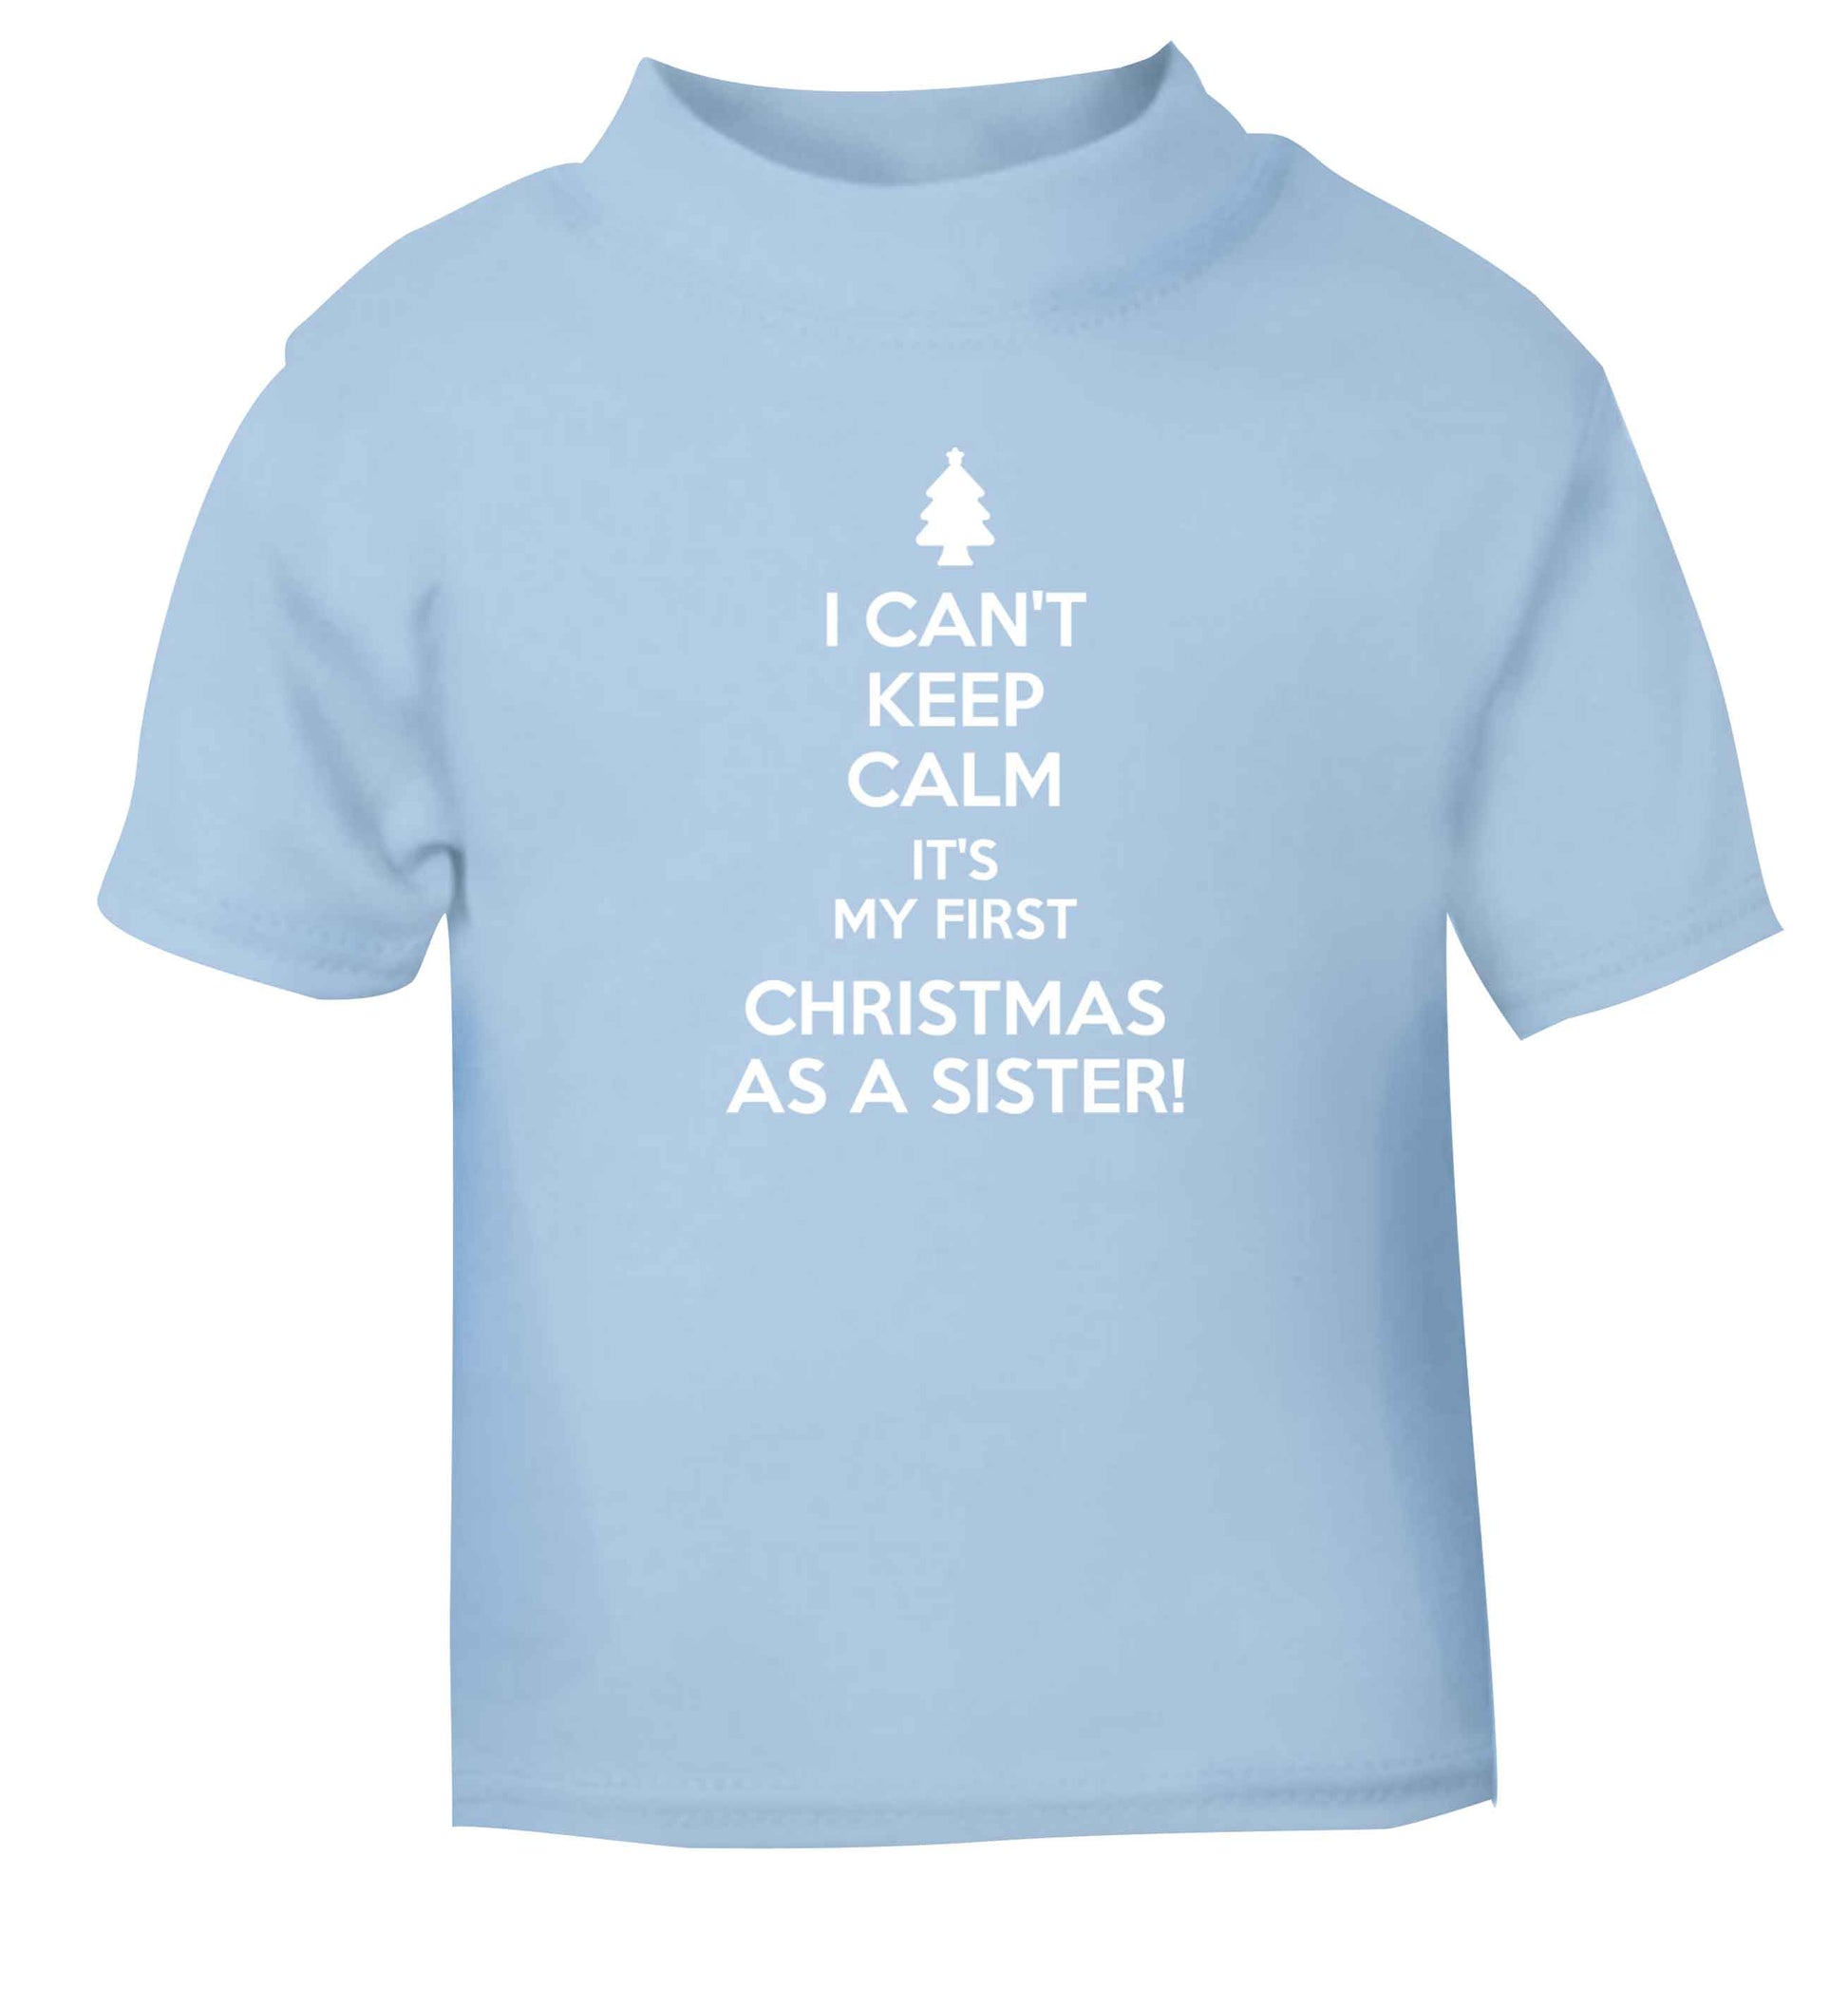 I can't keep calm it's my first Christmas as a sister! light blue Baby Toddler Tshirt 2 Years